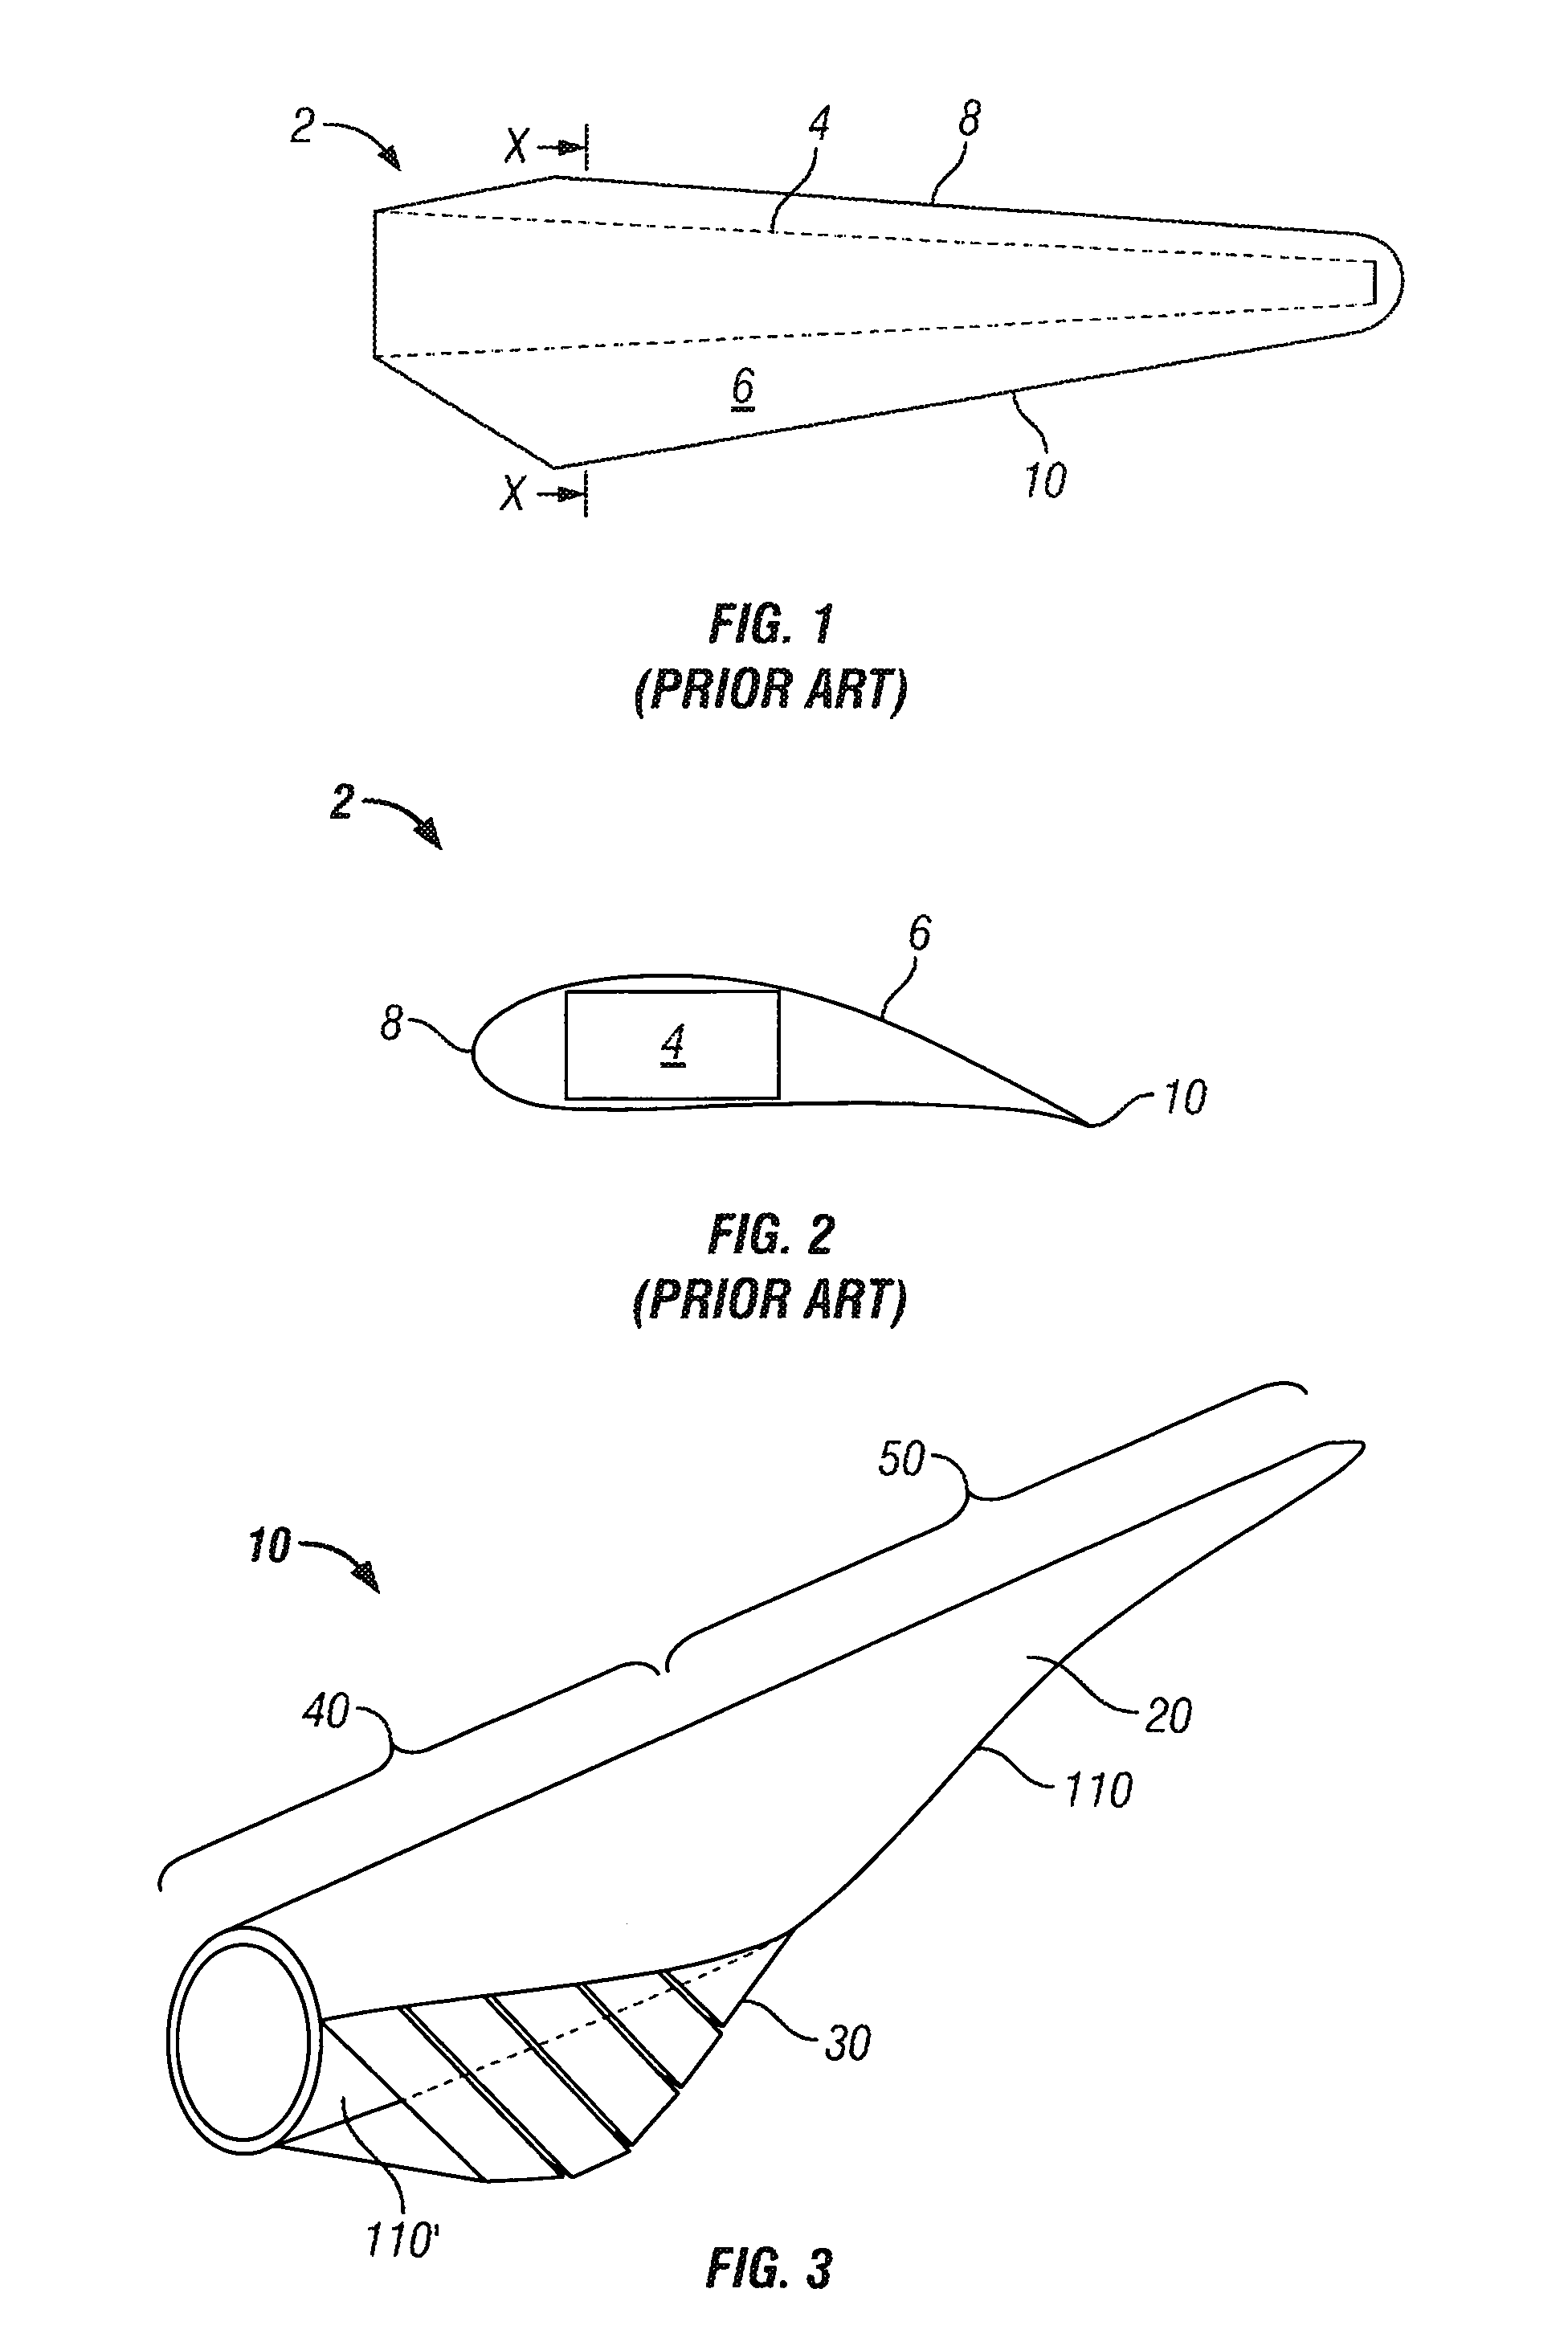 Segmented rotor blade extension portion